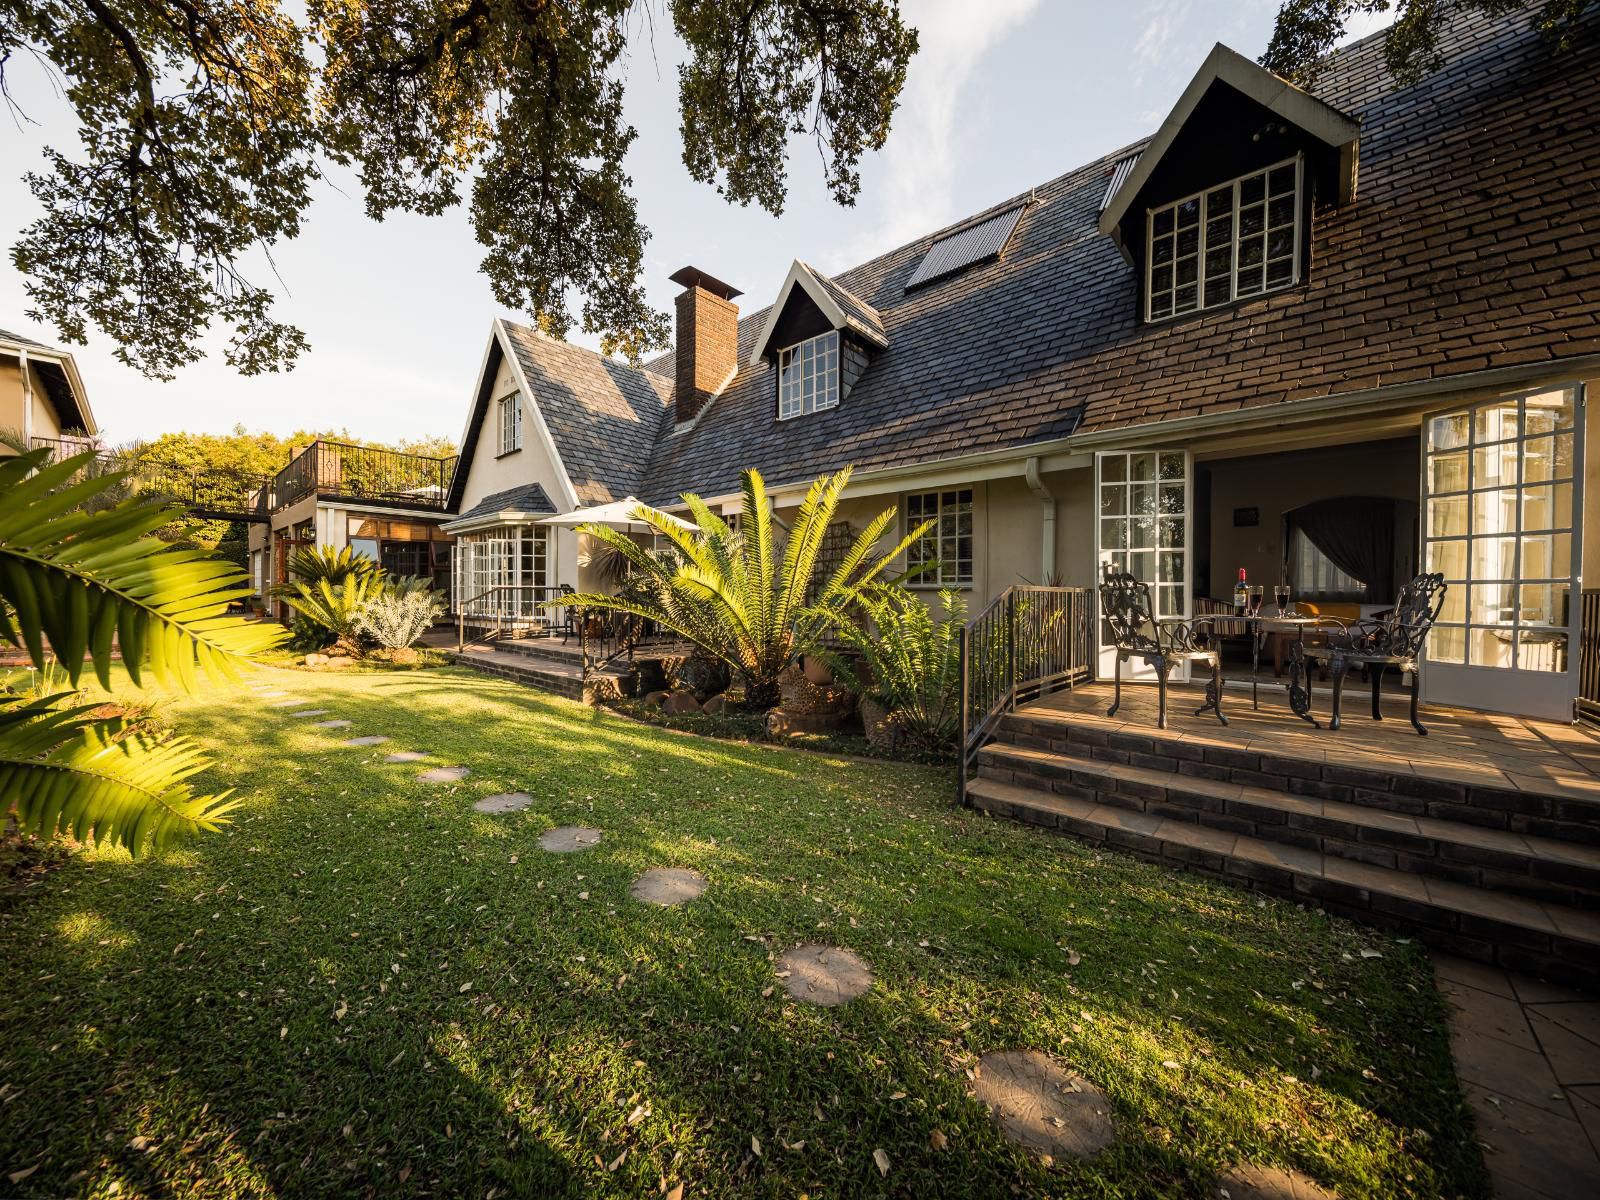 Gallo Manor Executive Bed And Breakfast Gallo Manor Johannesburg Gauteng South Africa House, Building, Architecture